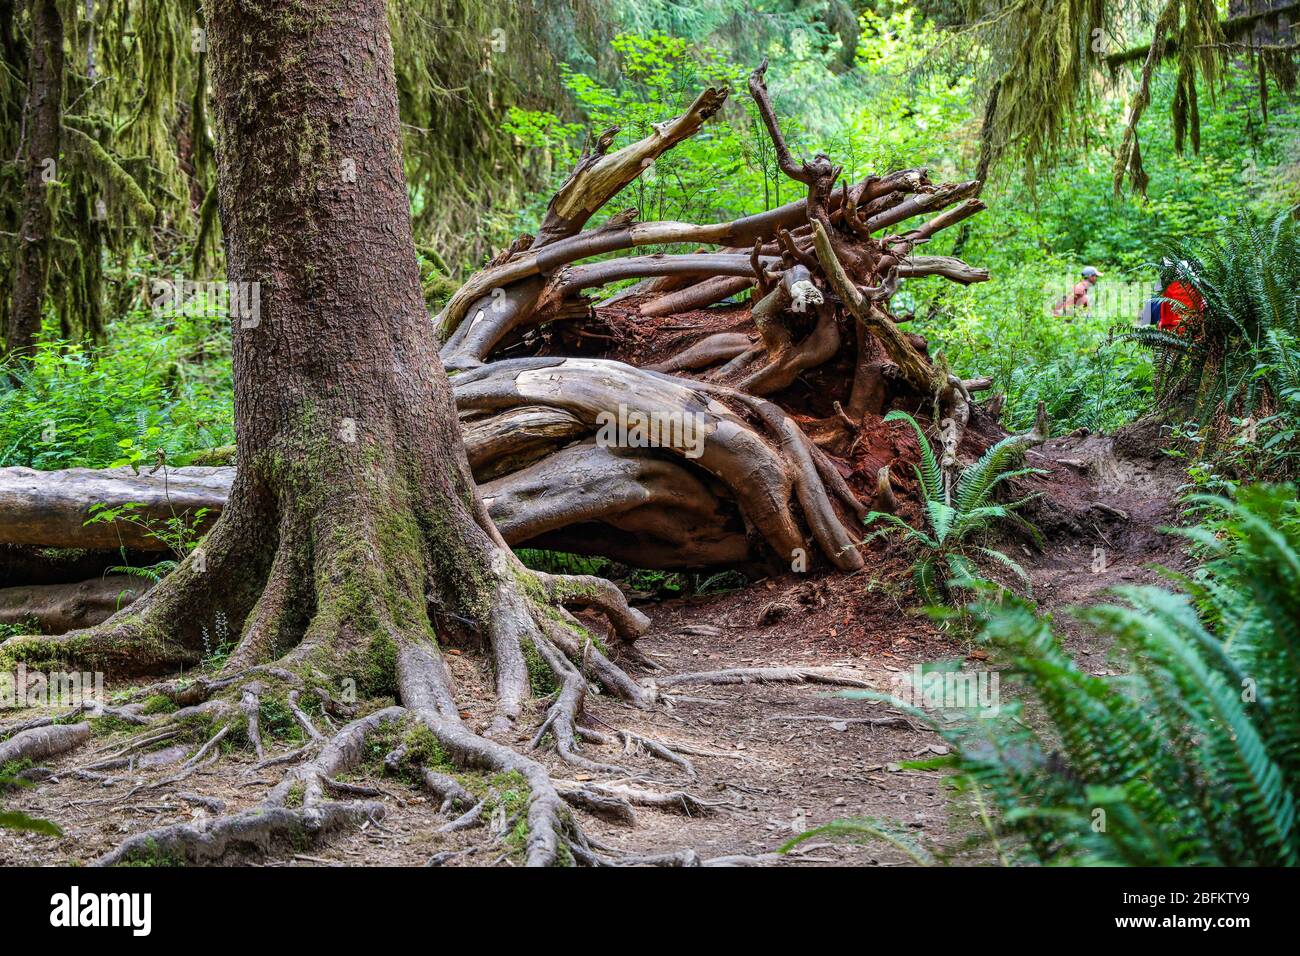 The Hall of Mosses Trail in the Hoh Rain Forest of Olympic National Park is lined with old trees, mostly bigleaf maples and Sitka spruces draped in mo Stock Photo